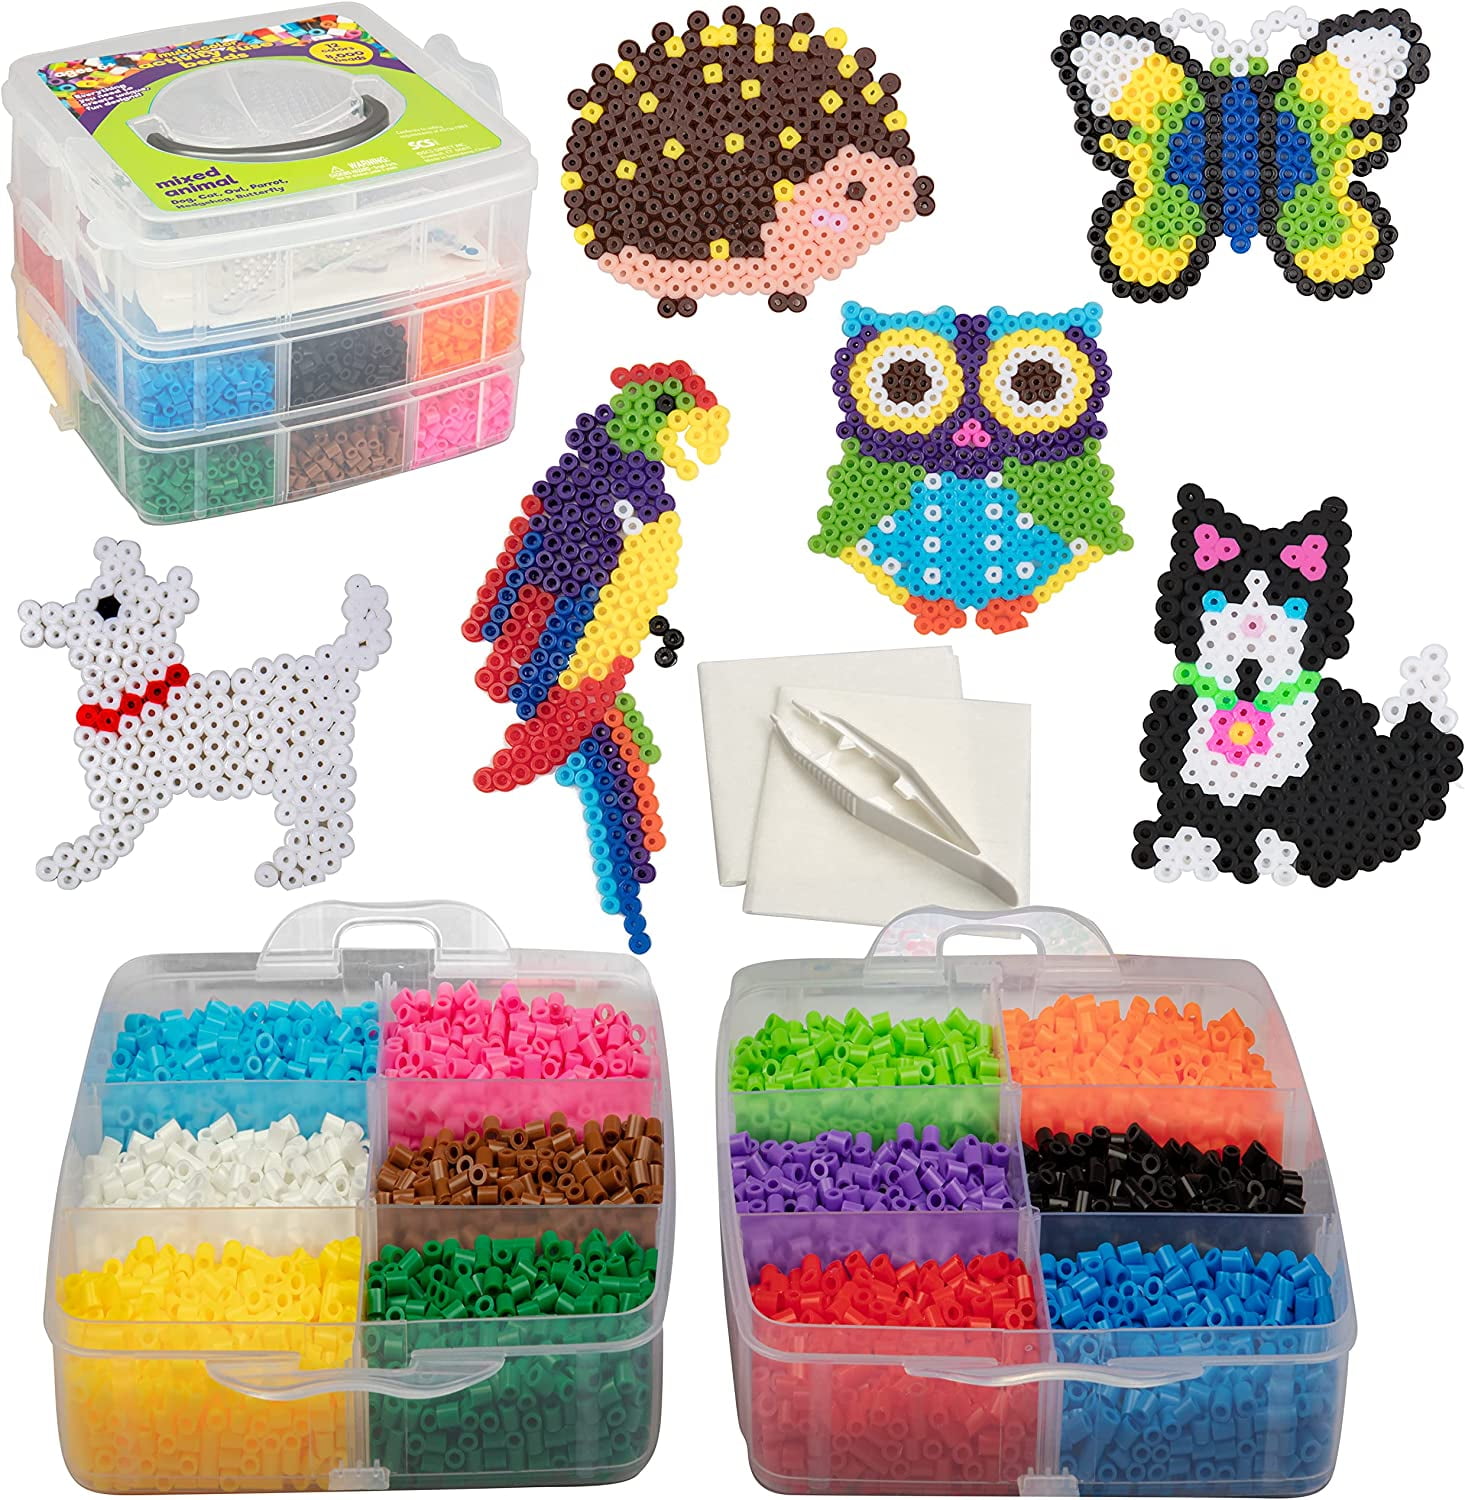 Perler Peg Boards - Clear ⋆ Time Machine Hobby